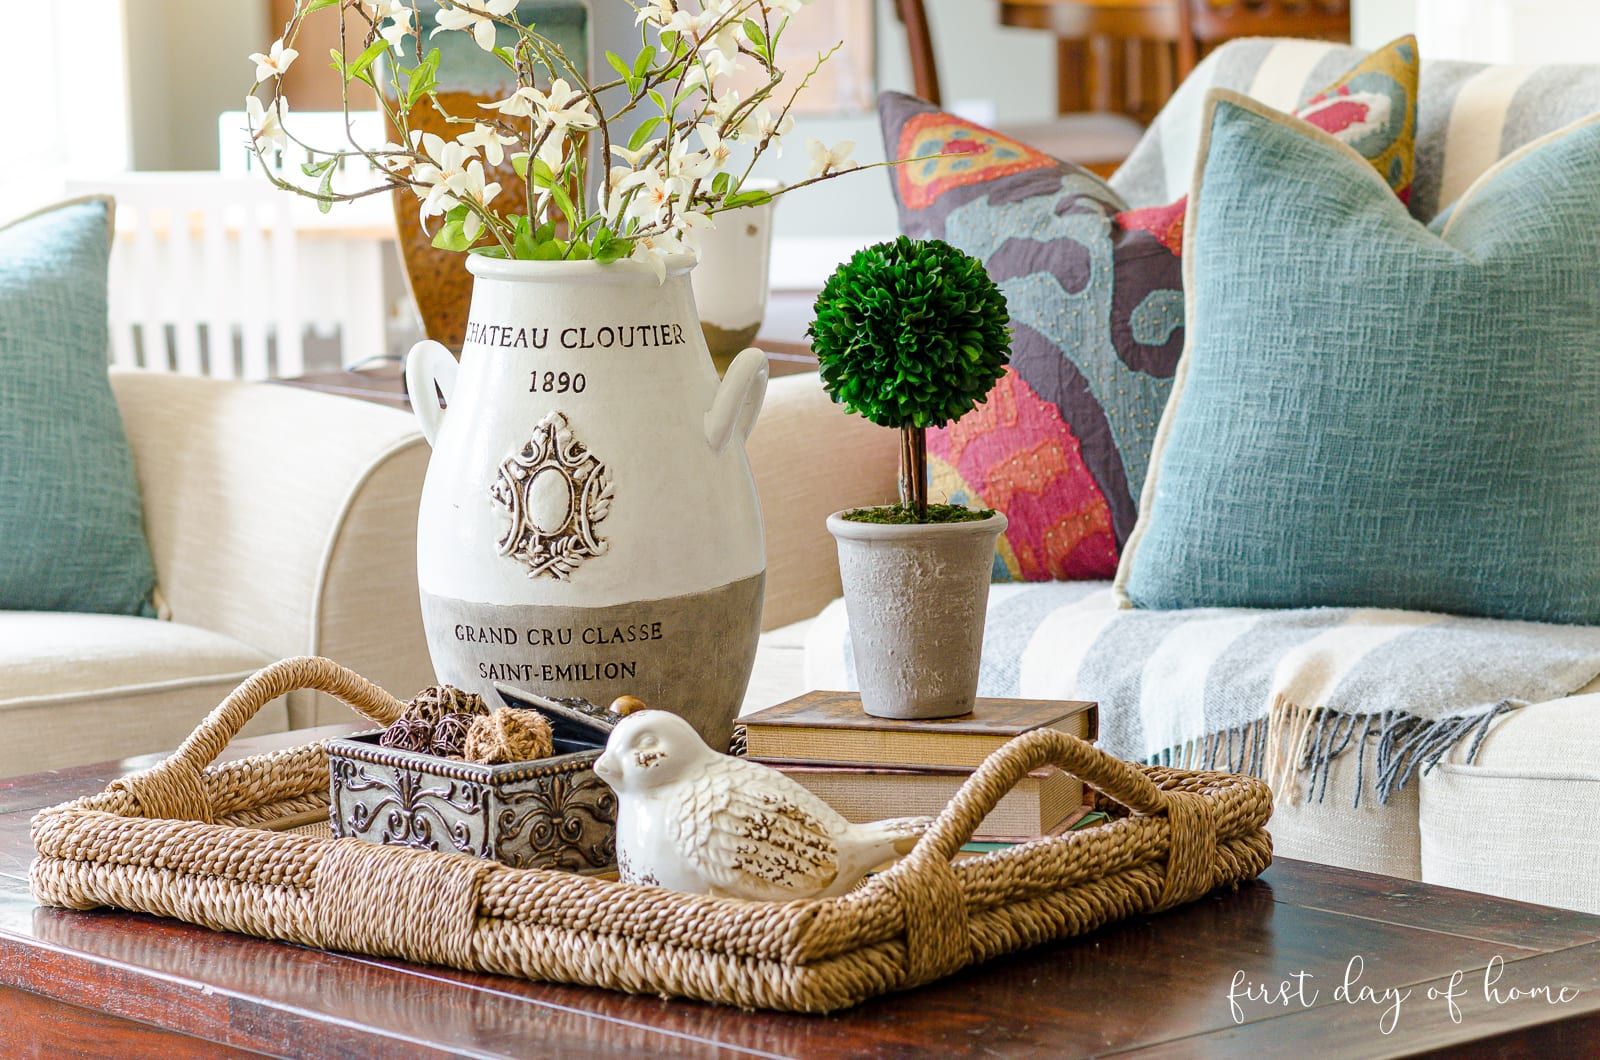 How To Create An Elegant Look With Coffee Table Decor Throughout Coffee Tables With Trays (View 2 of 15)